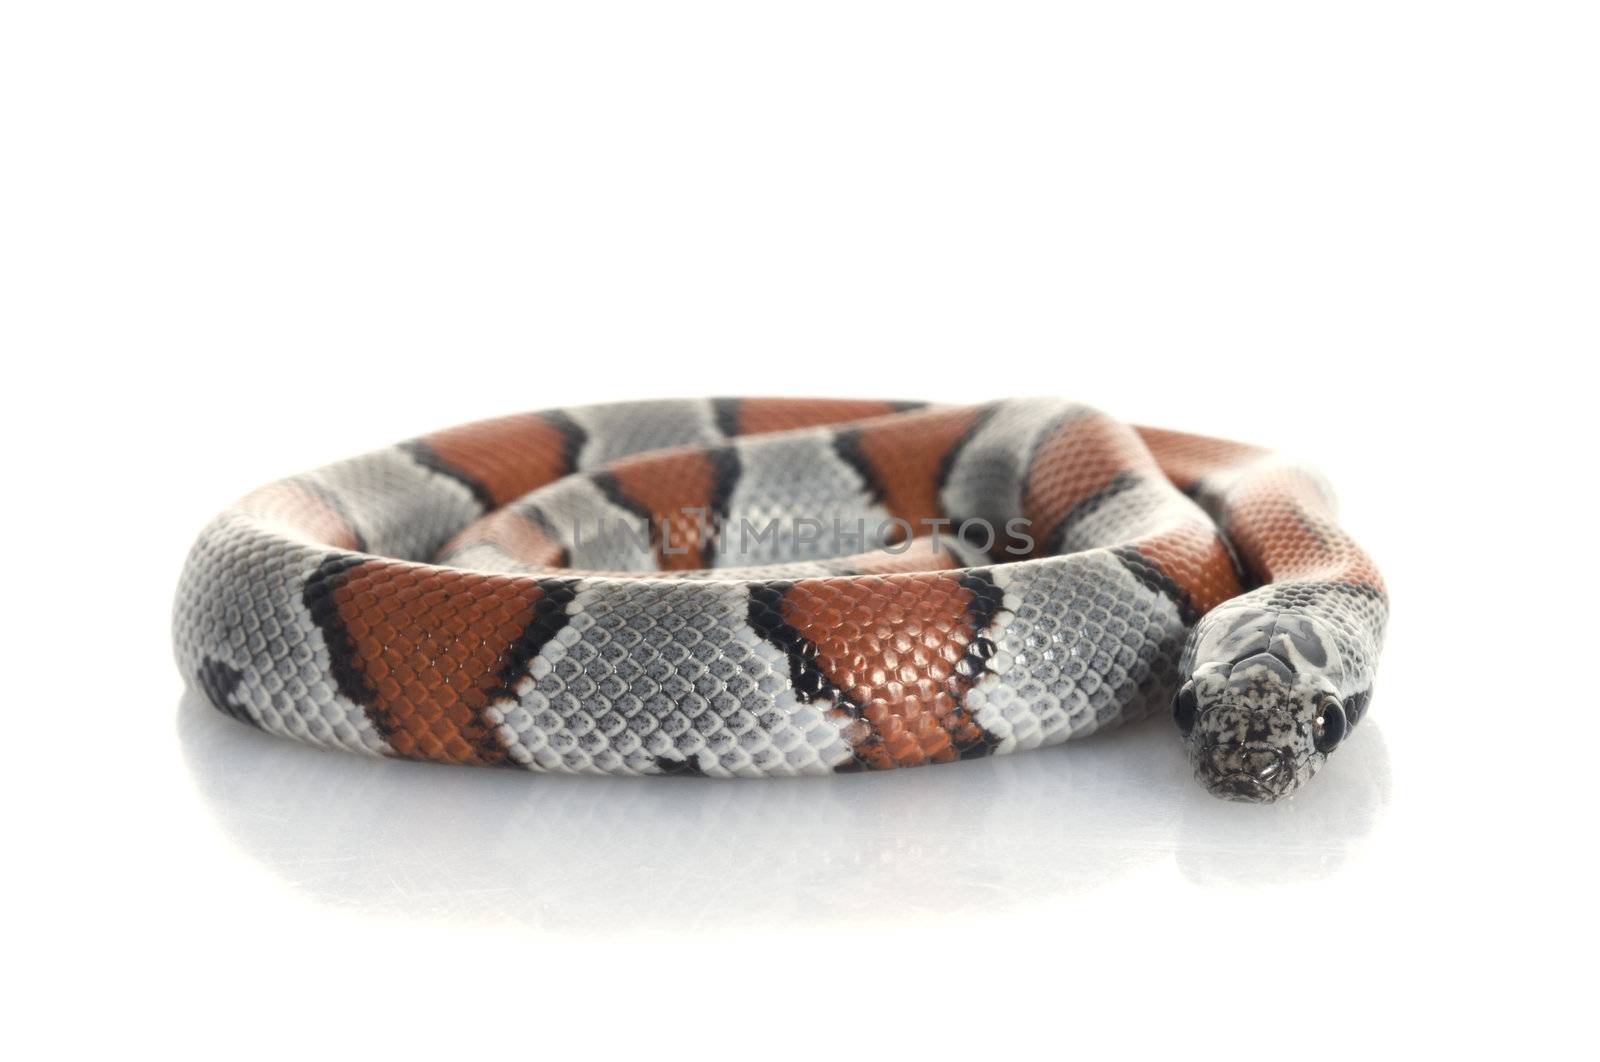 Gray Banded Snake by Njean